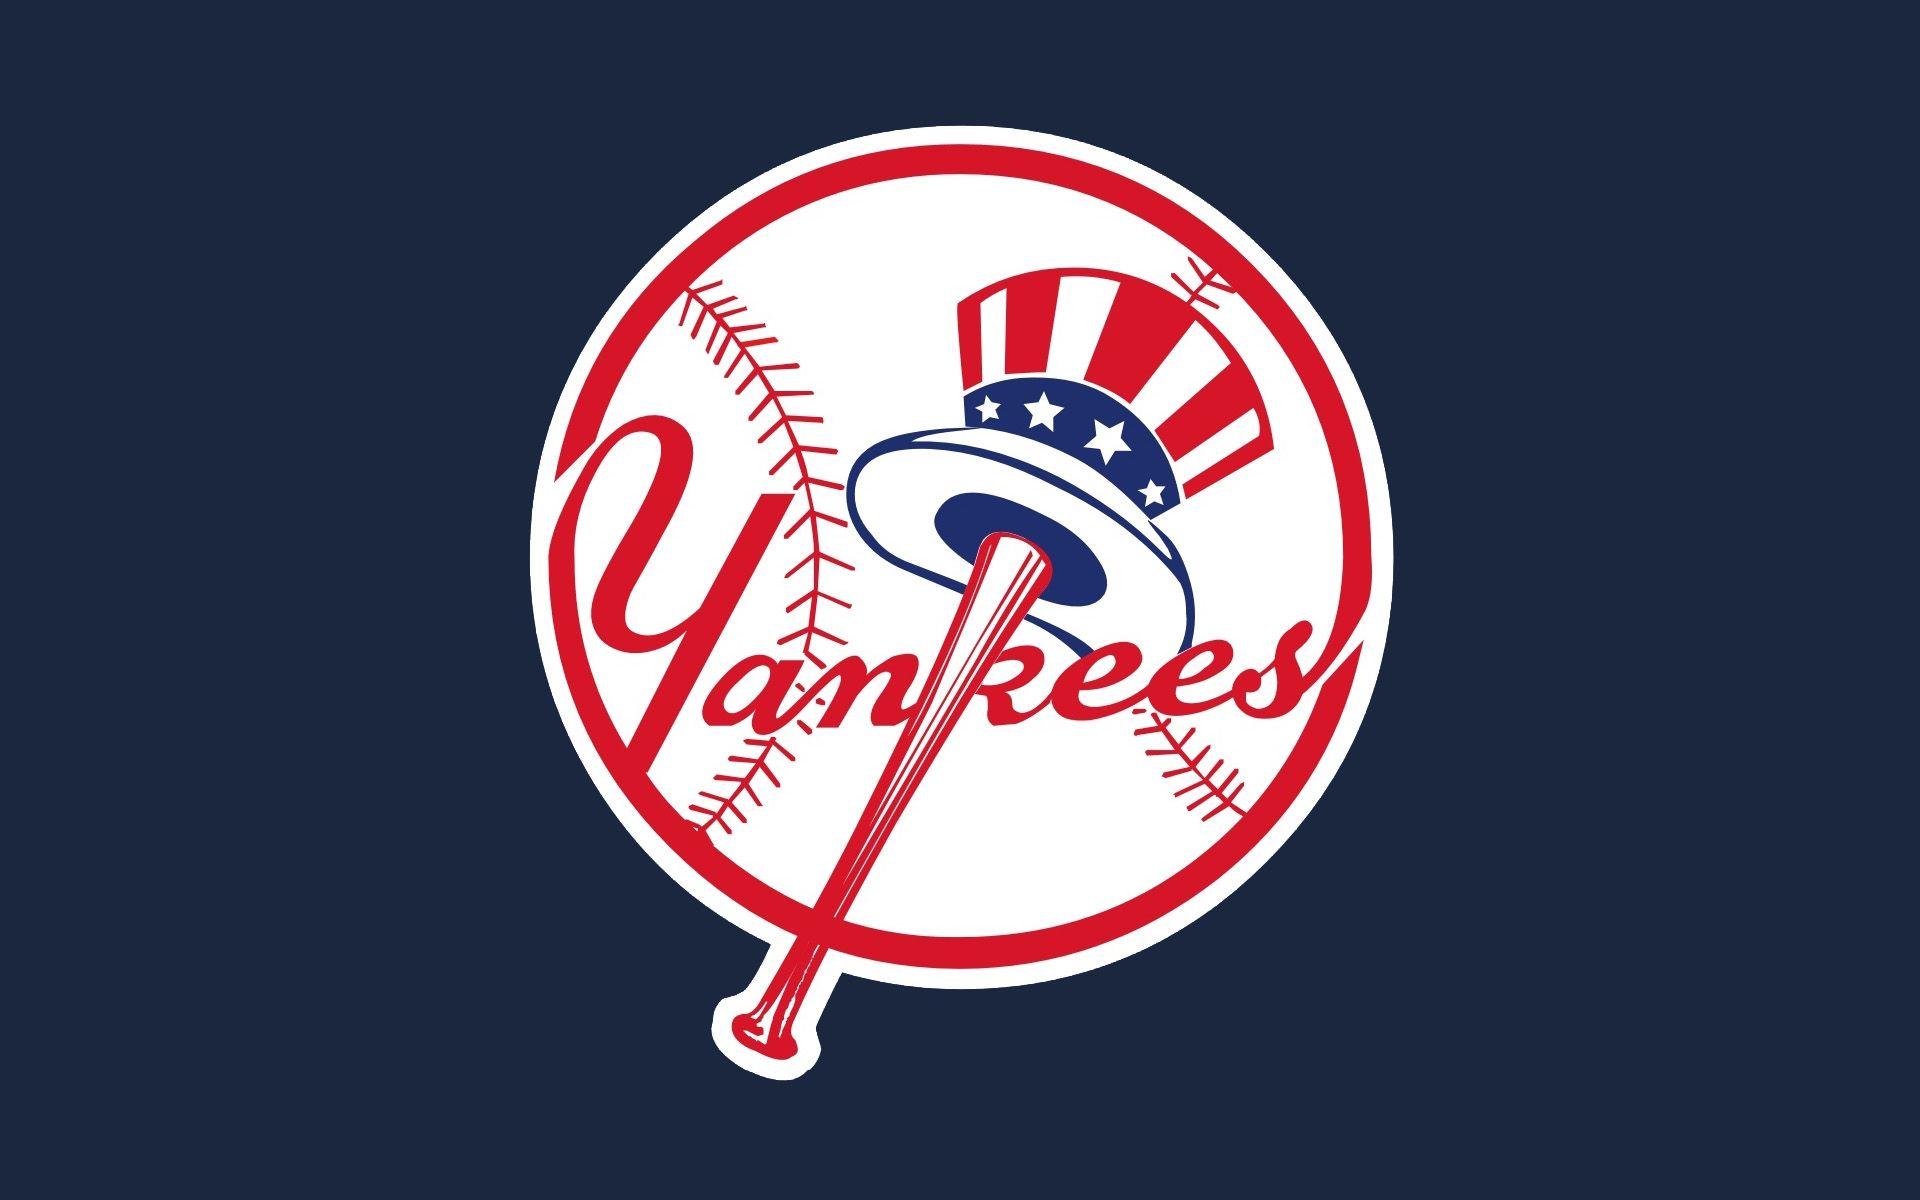 New York Yankees Hd Wallpapers Tattoo Ideas For Women